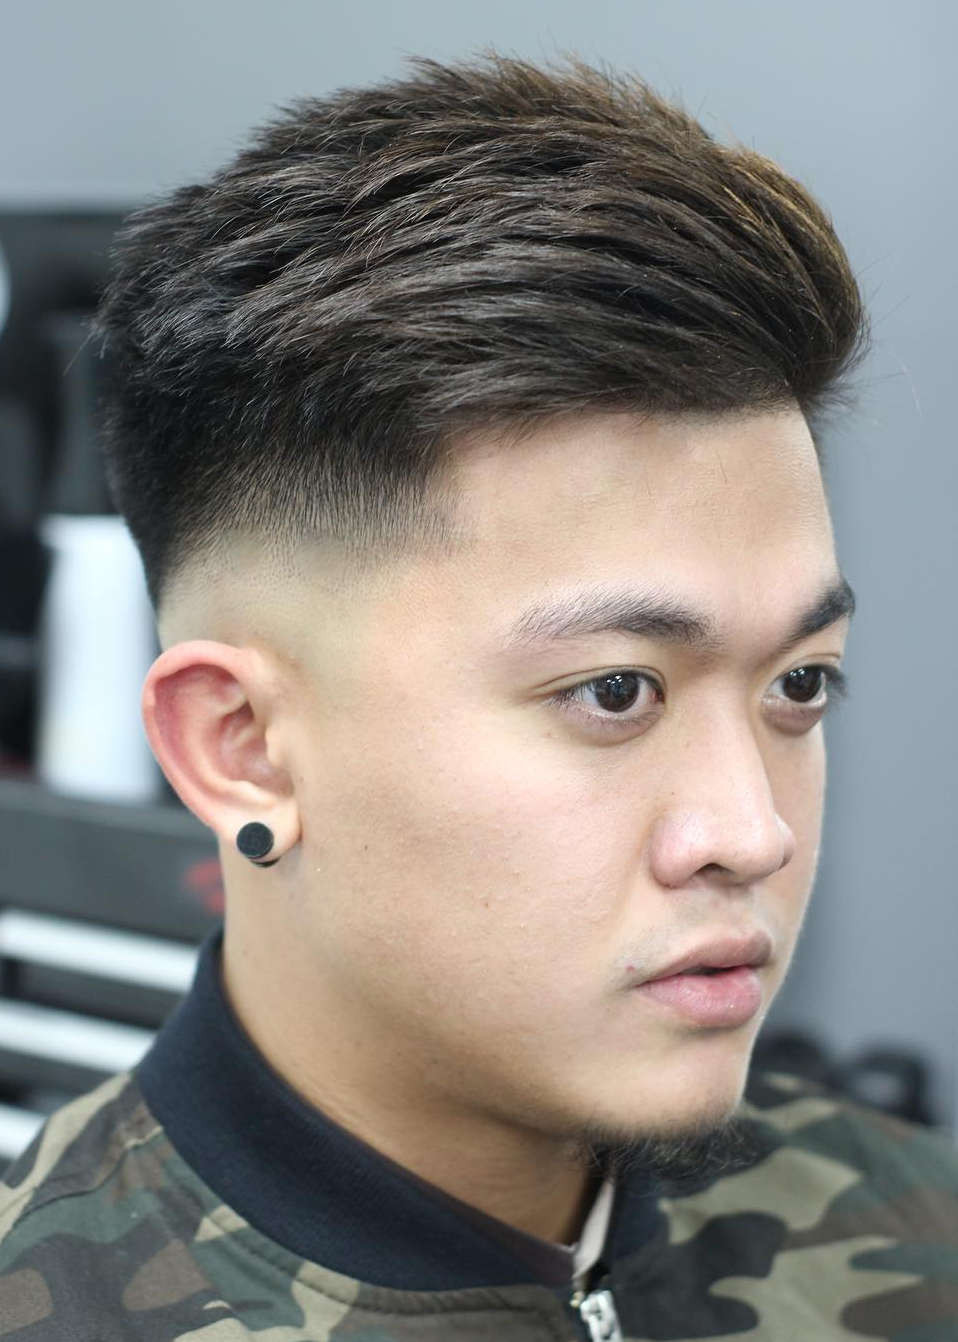 Asian Hairstyles Male
 Top 30 Trendy Asian Men Hairstyles 2019